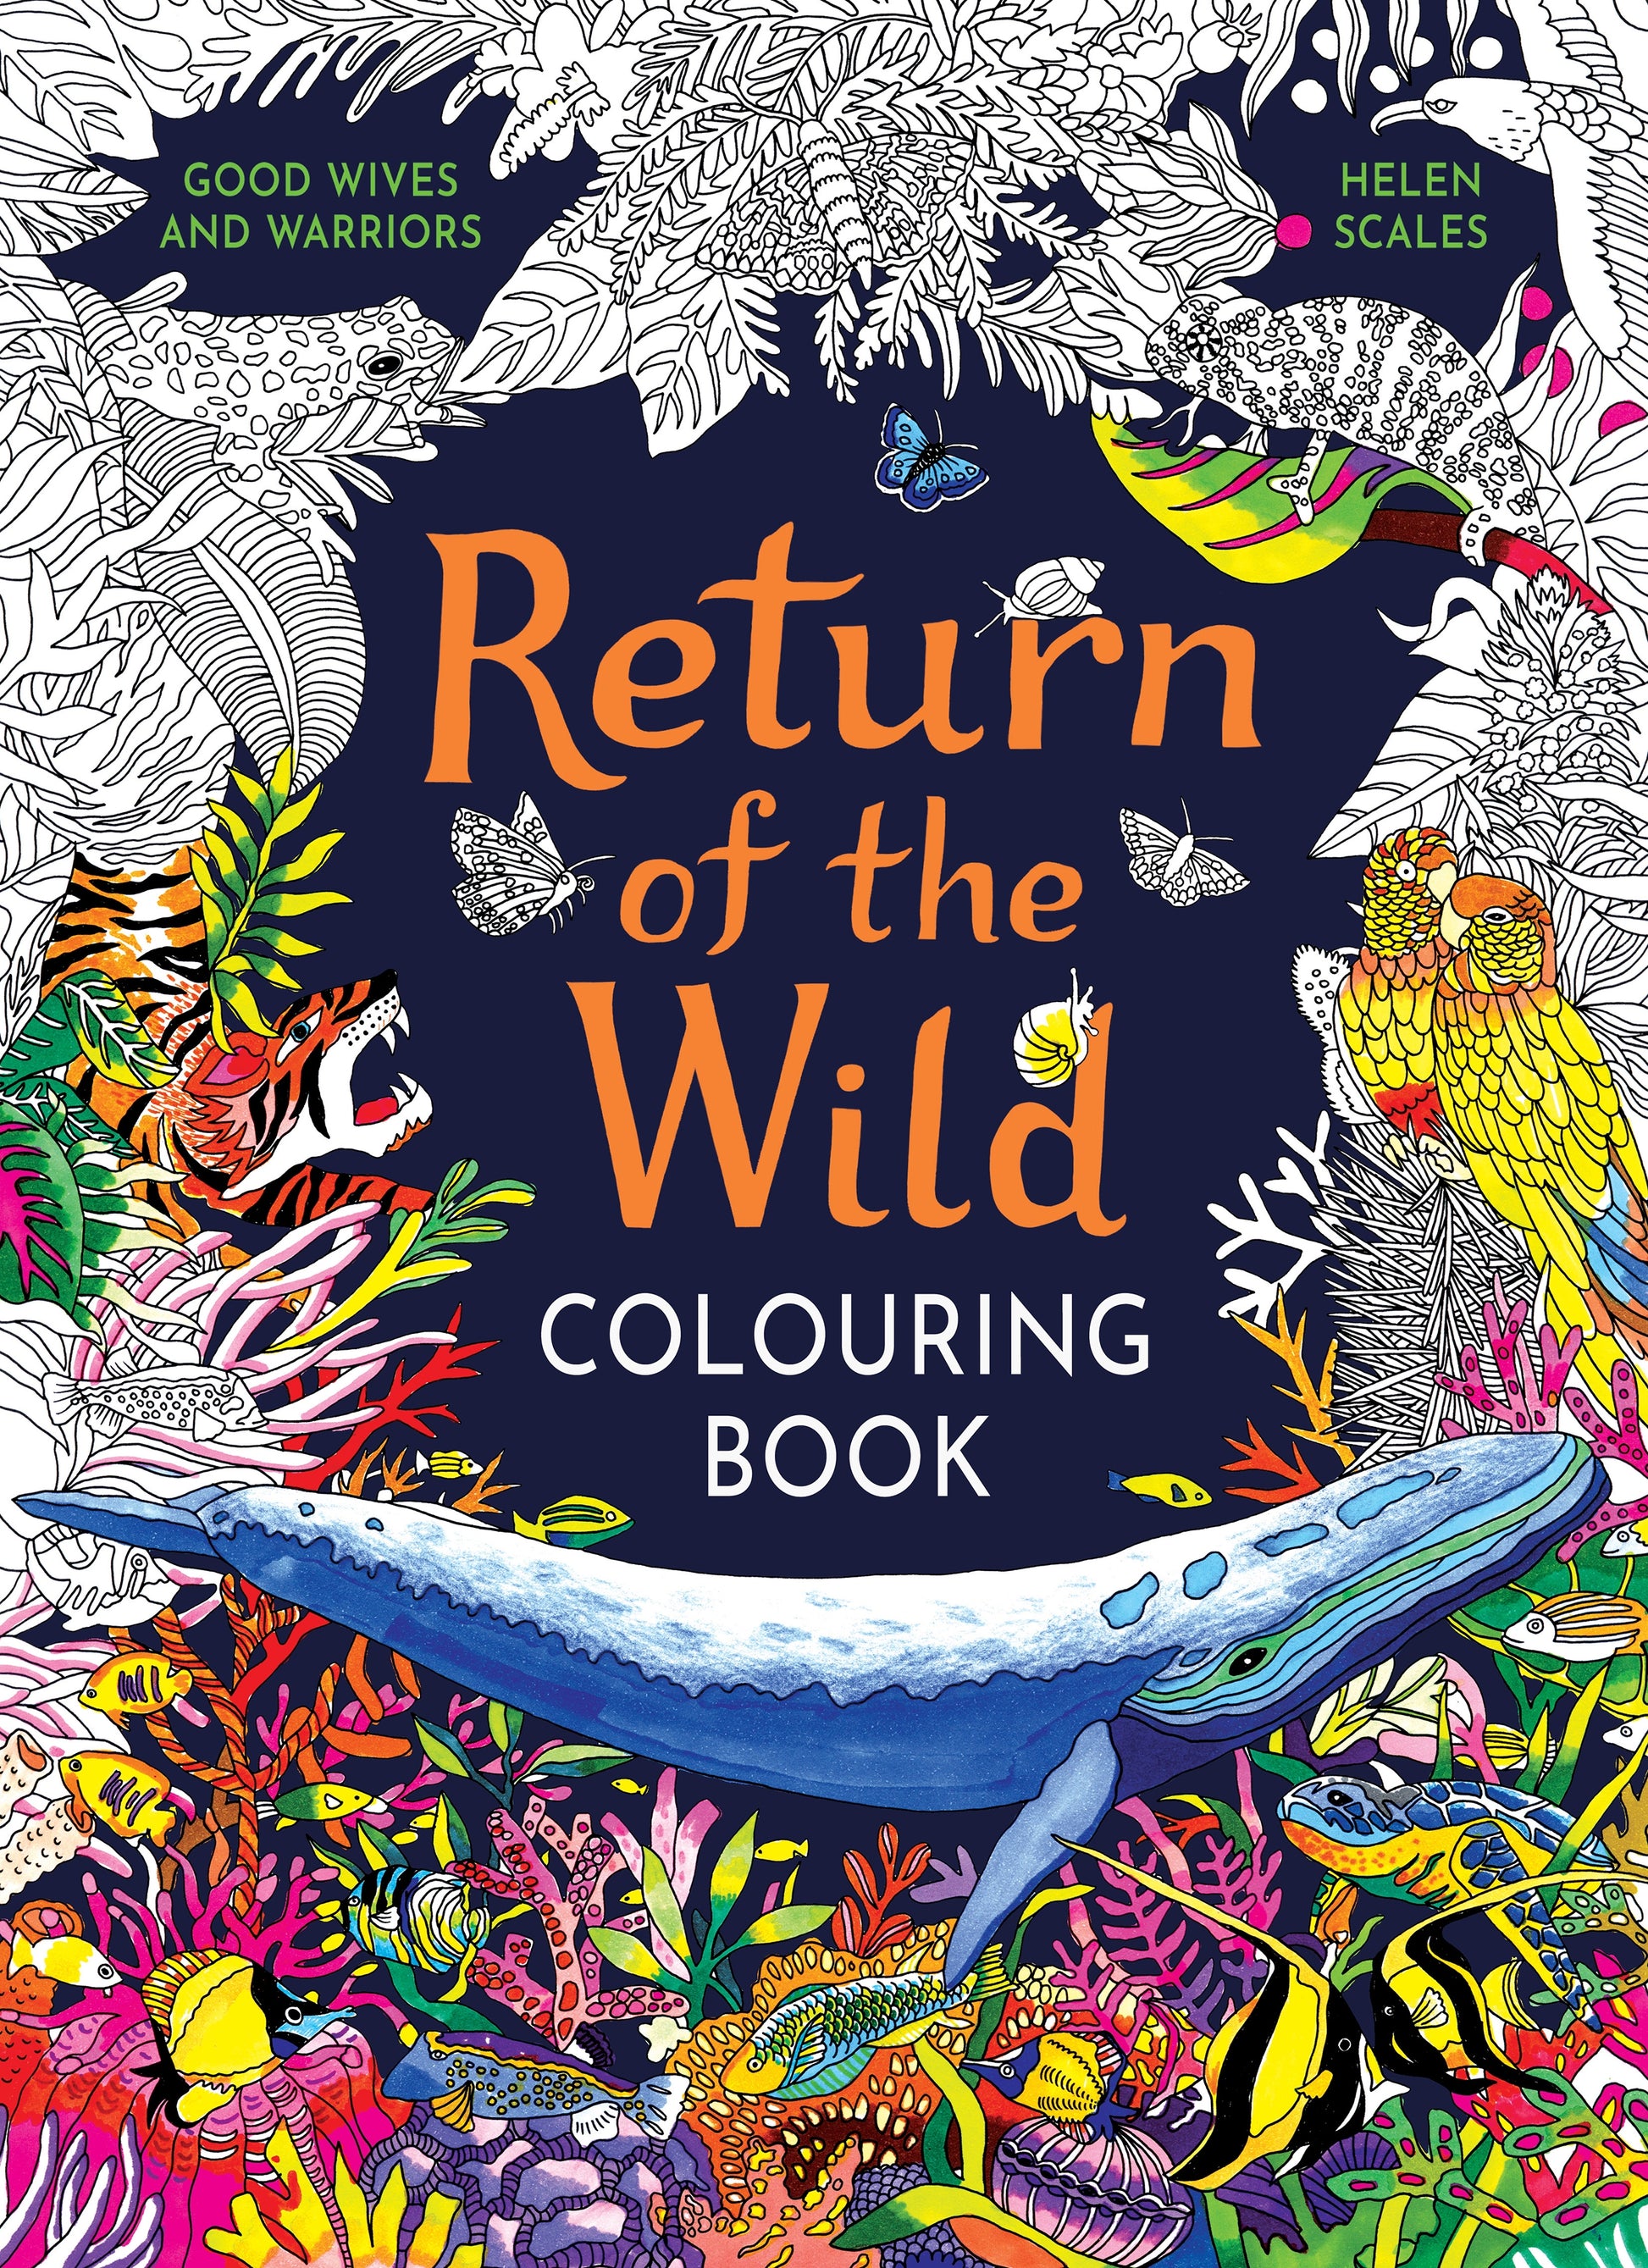 Return of the Wild Colouring Book by Helen Scales